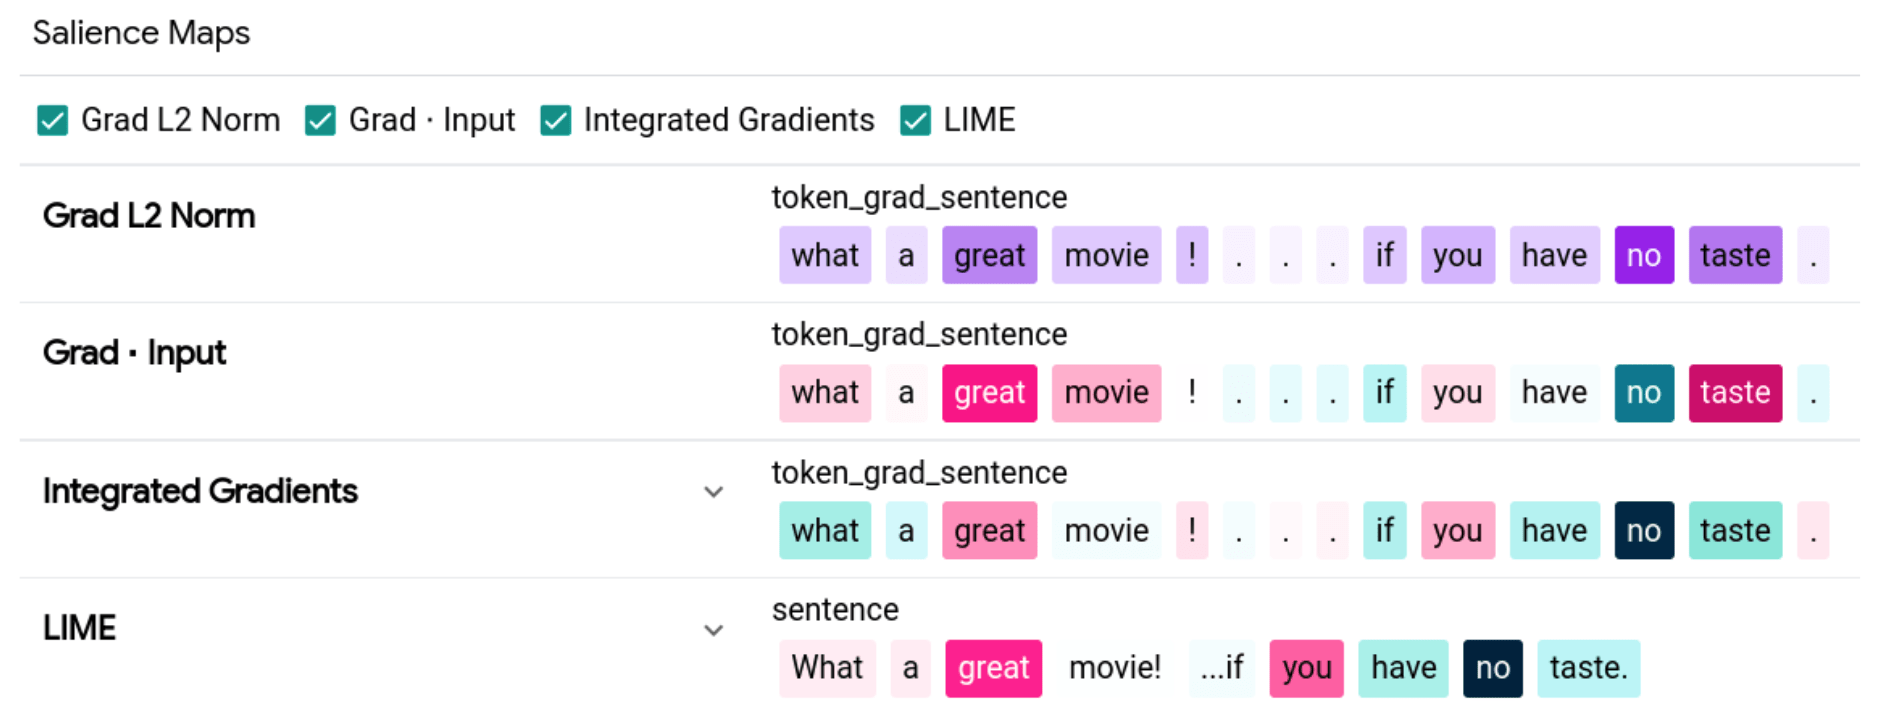 Figure 3. The result of explaining positive sentiment prediction in text “What a great movie! ...if you have no taste. returned by LIT